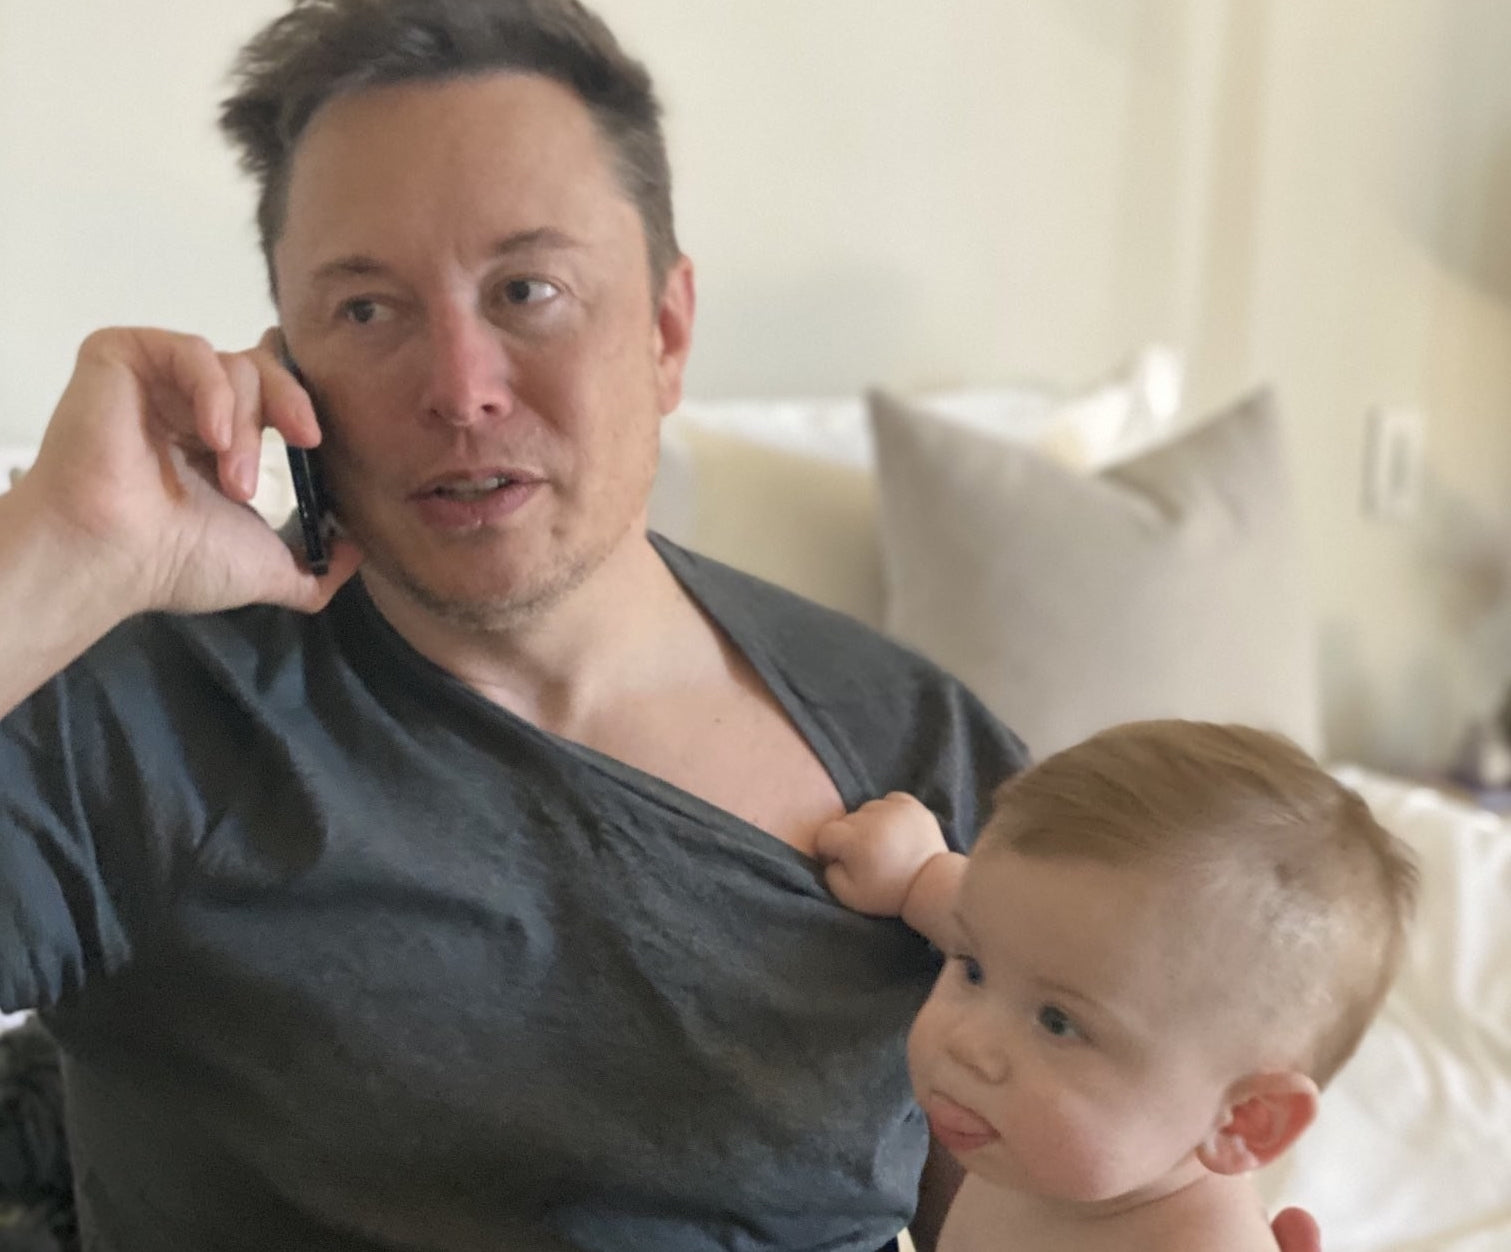 Elon musk talking on the phone while carrying a baby